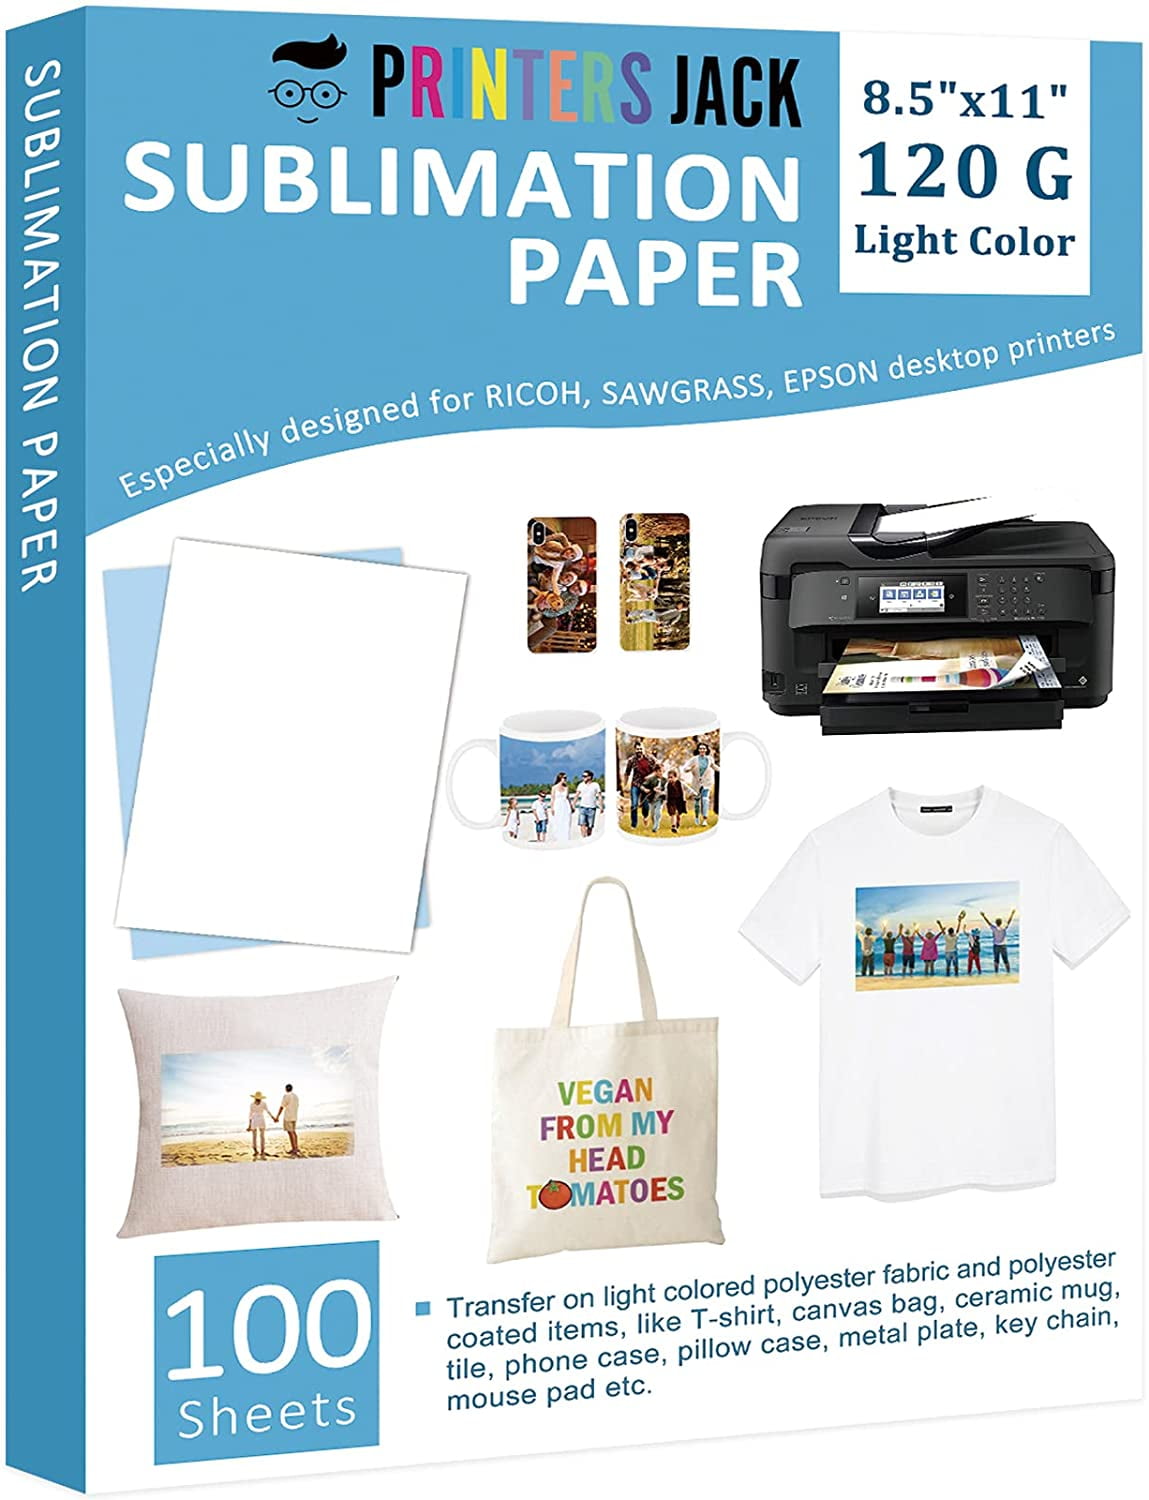 A-SUB Sublimation Paper 8.5x14 Inch 110 Sheets for Any Inkjet Printer which  Match Sublimation Ink 125g Legal Size Sublimation Paper Heat Transfer